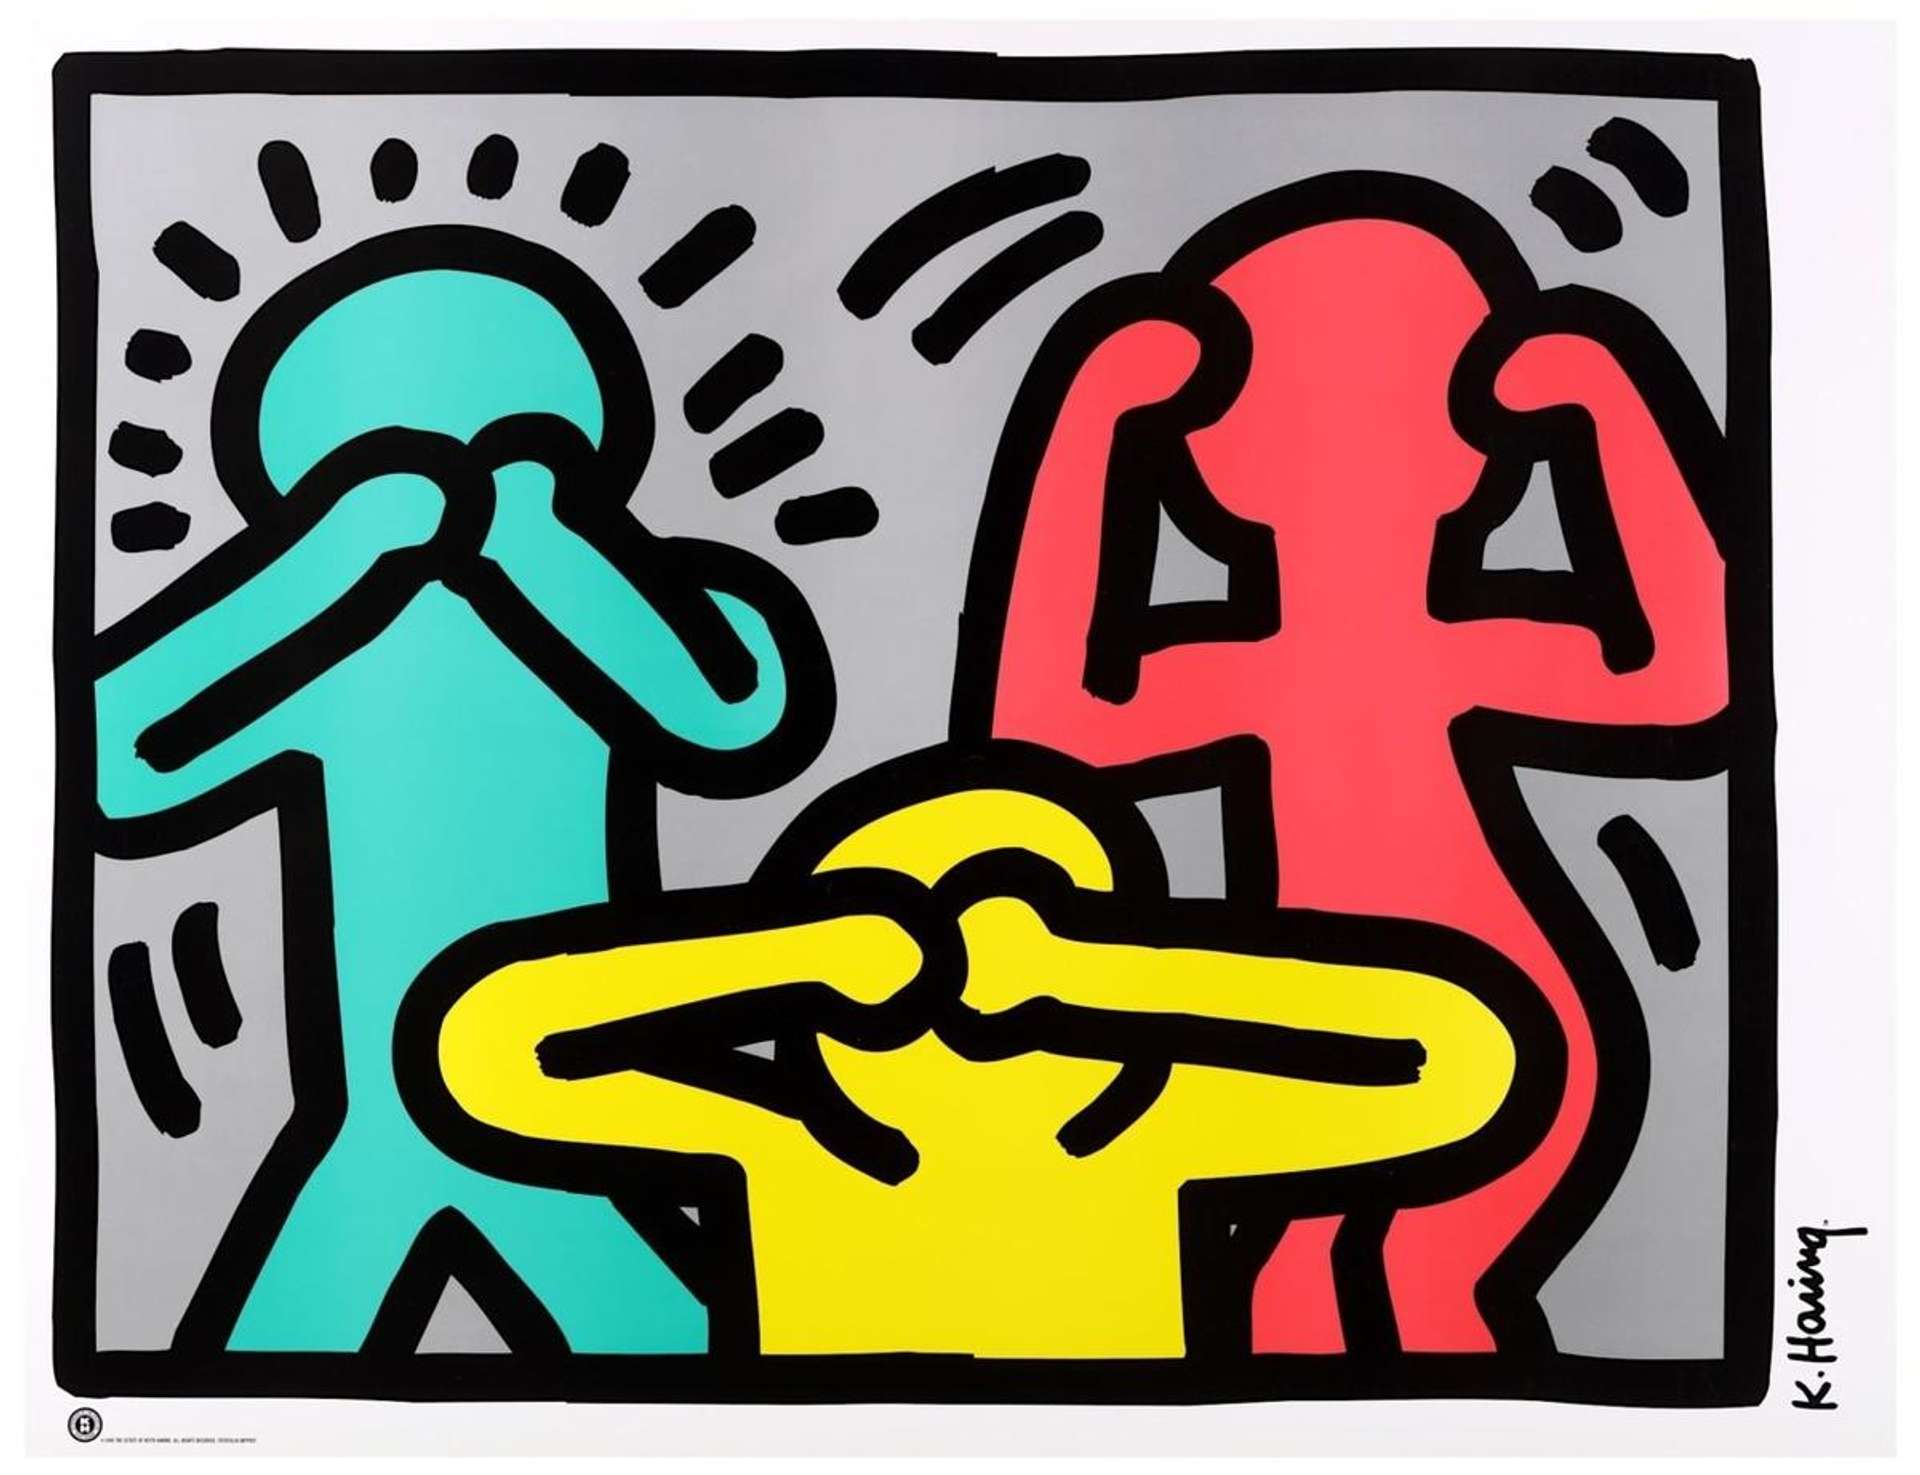 Keith Haring: The too-brief life and joyful work of the gay